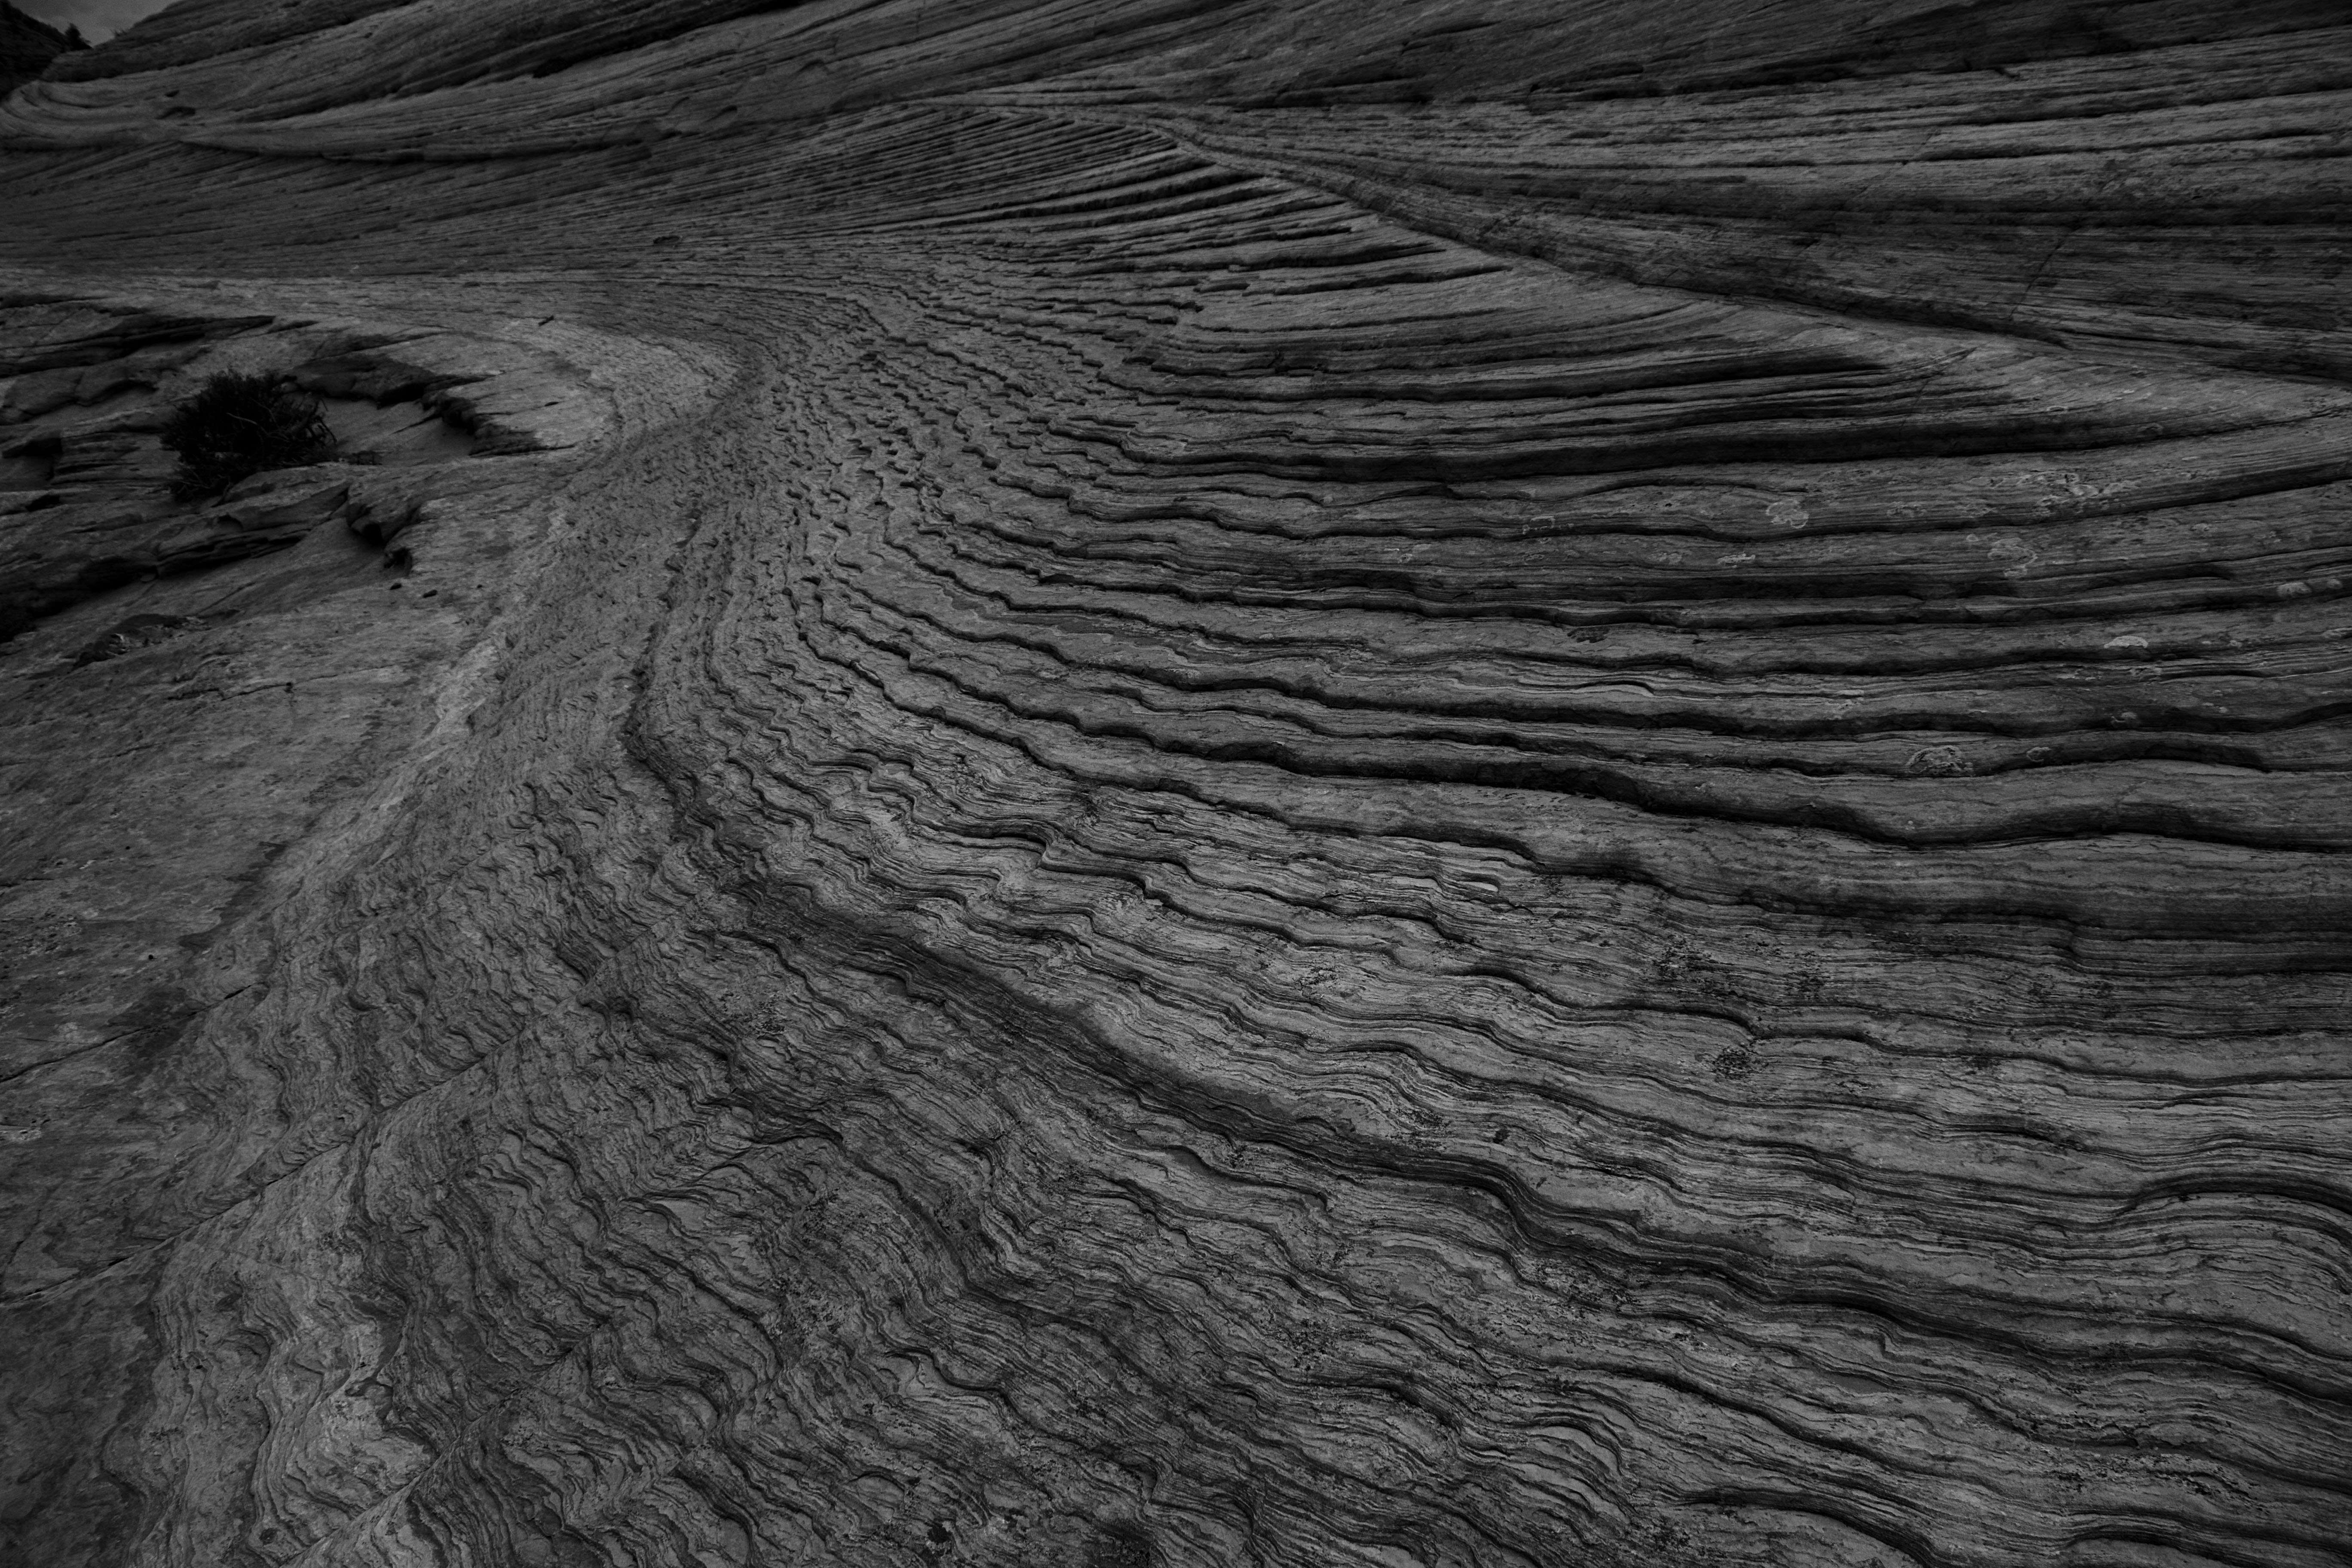 a black and white image of the crazy texture rocks can form